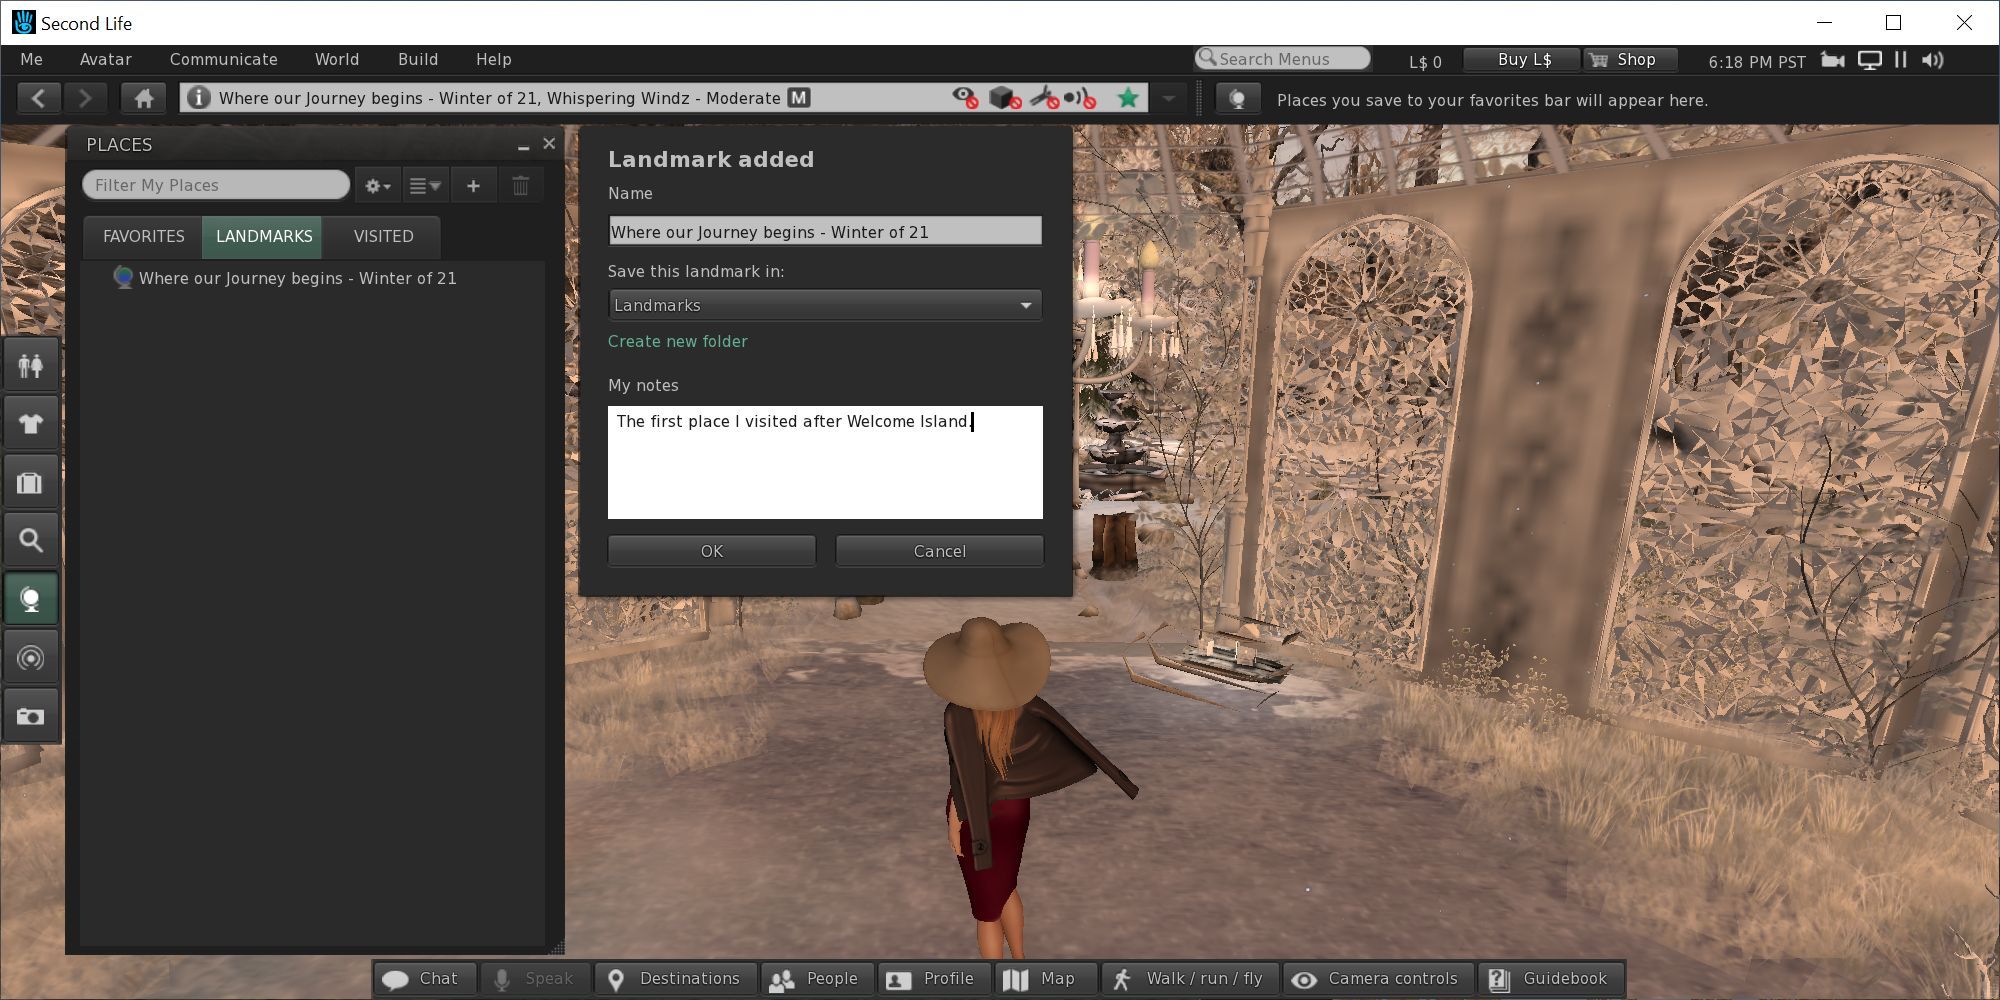 Second Life Places Menu for Landmarks and Favorites